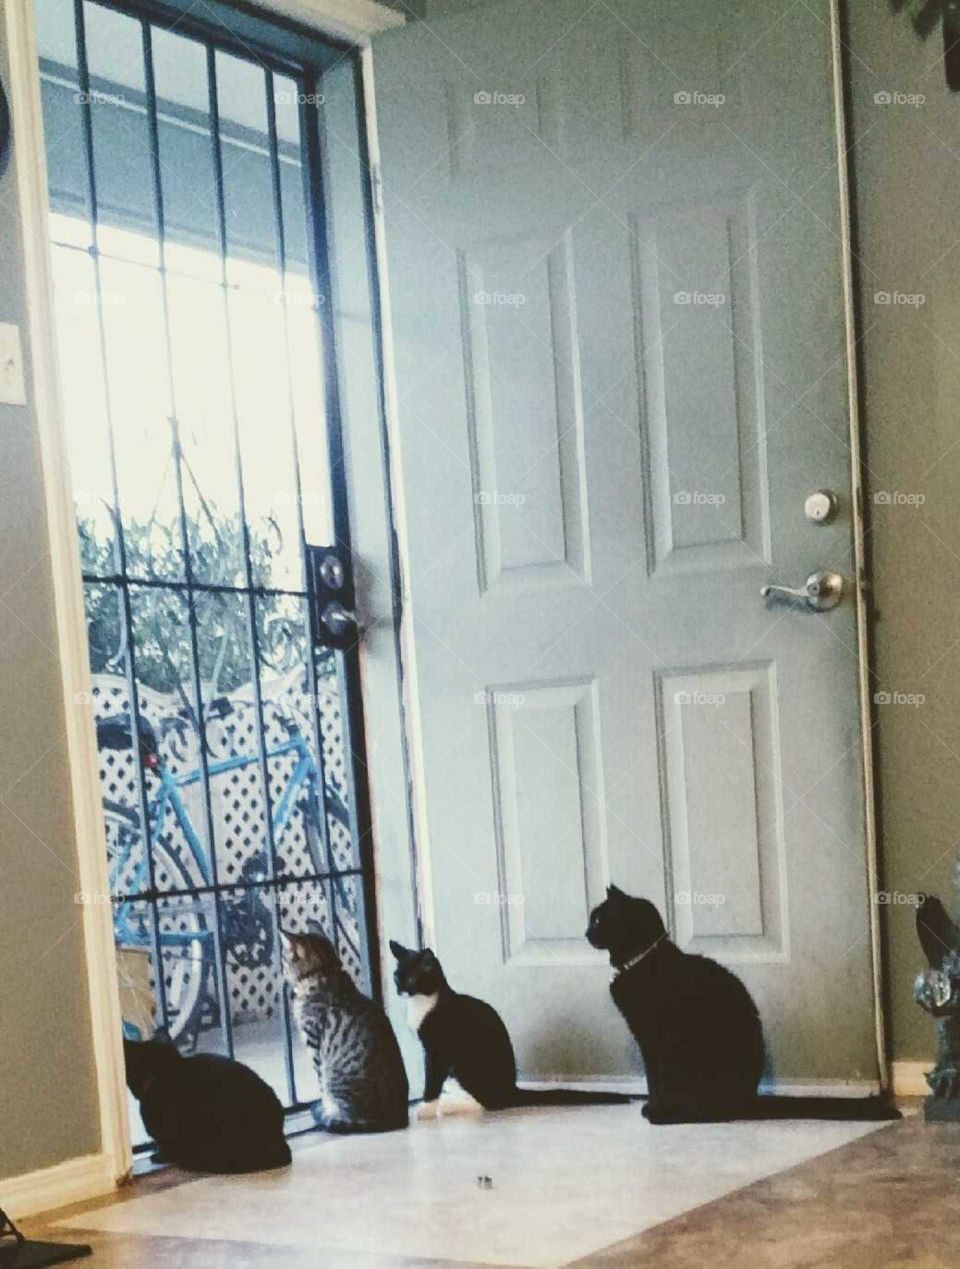 the four cats